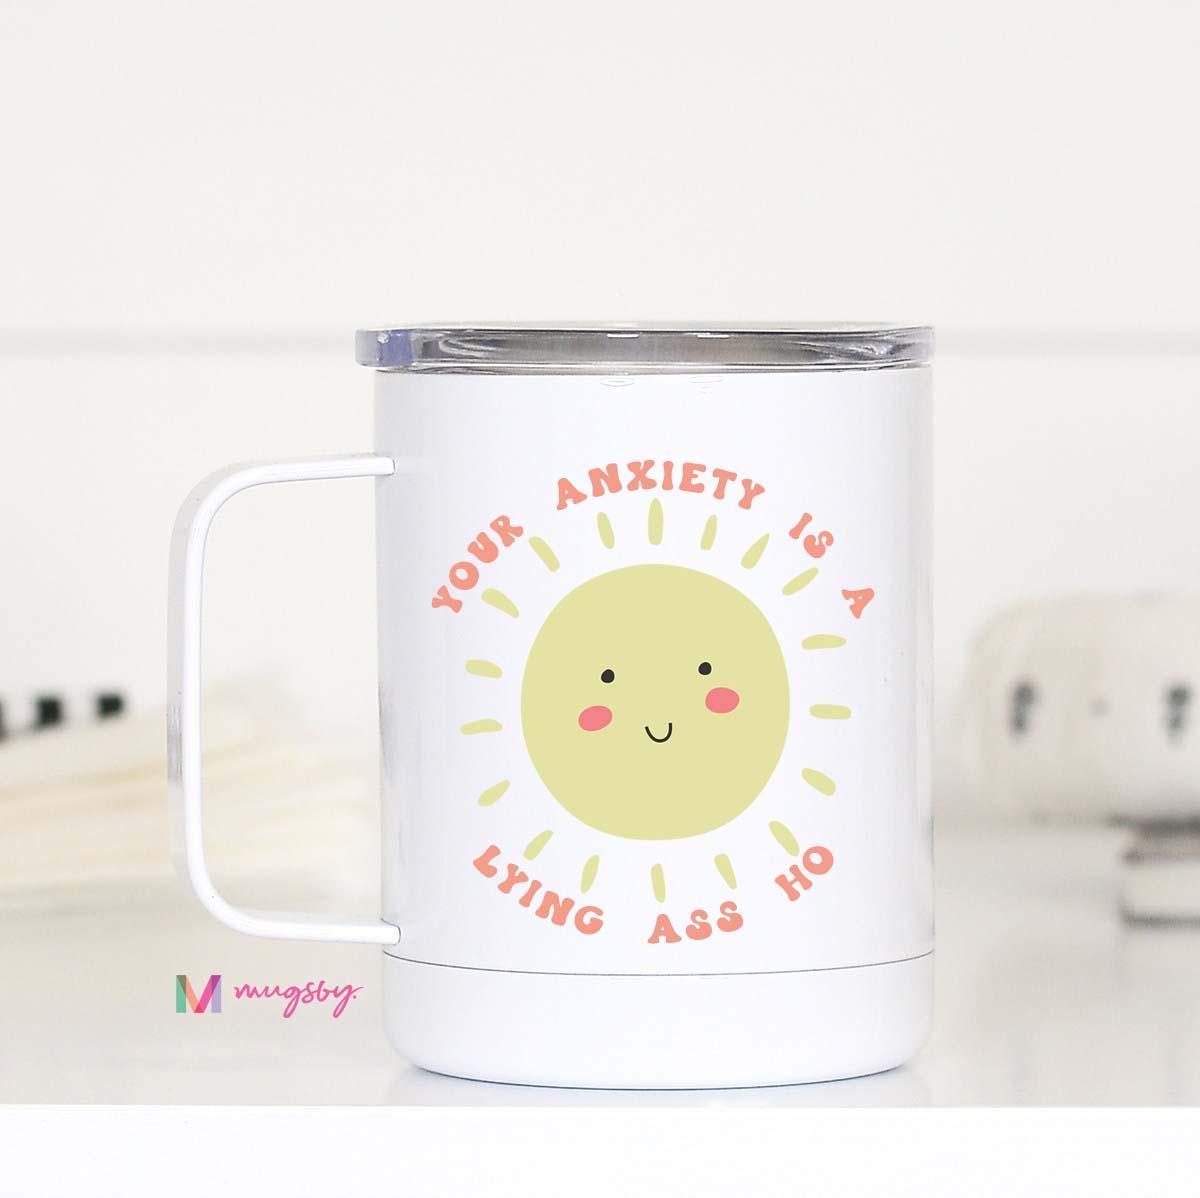 Your Anxiety Travel Cup